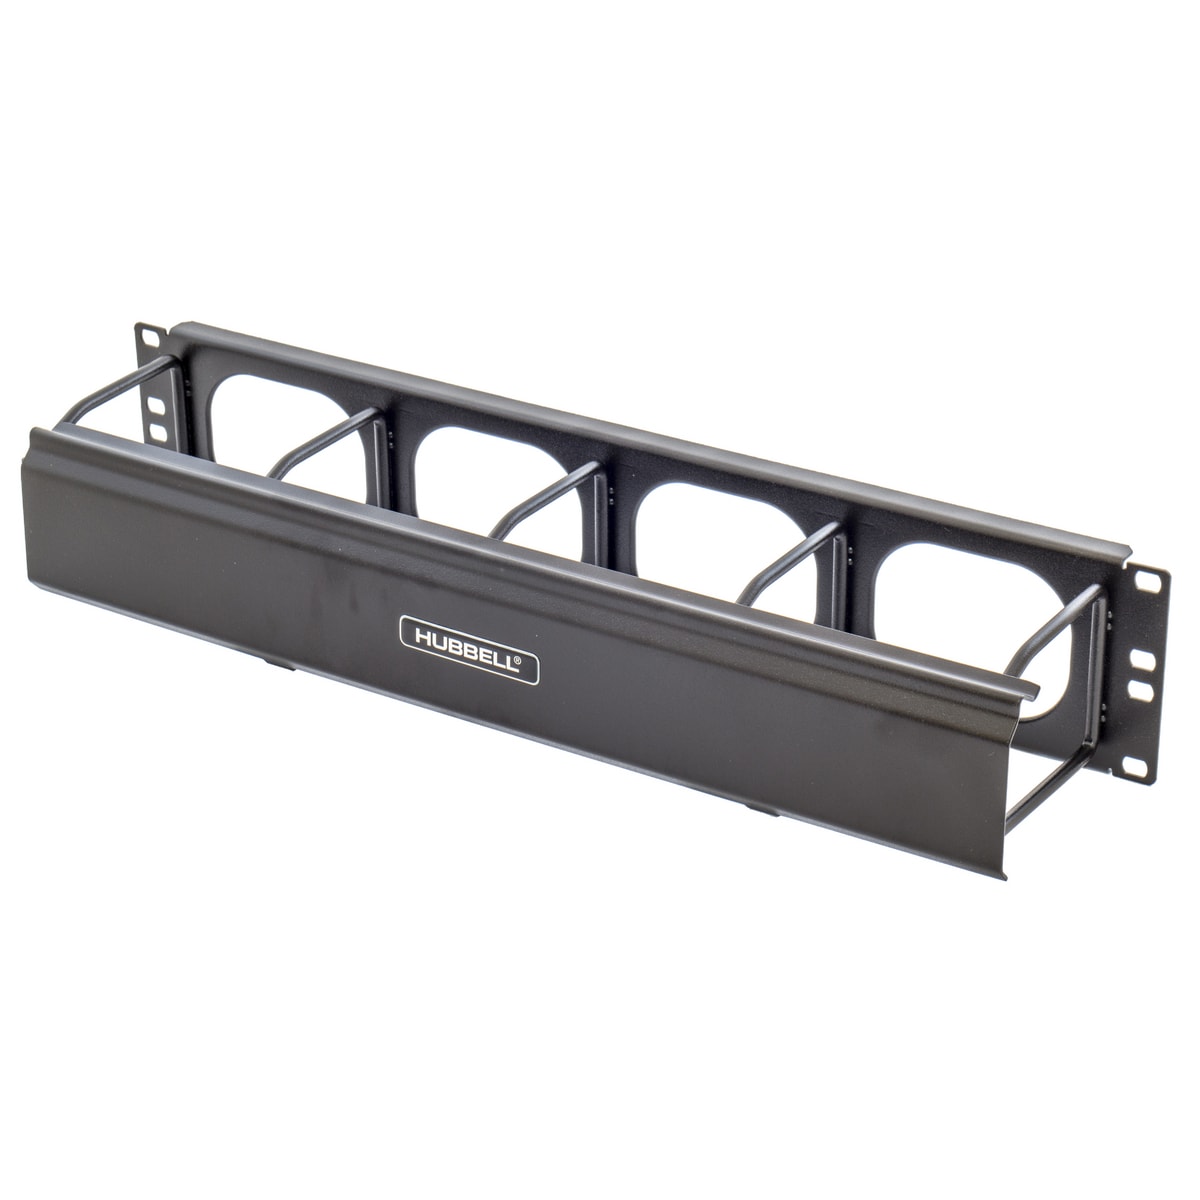 Hubbell M Series rack cable management panel (horizontal) - 2U